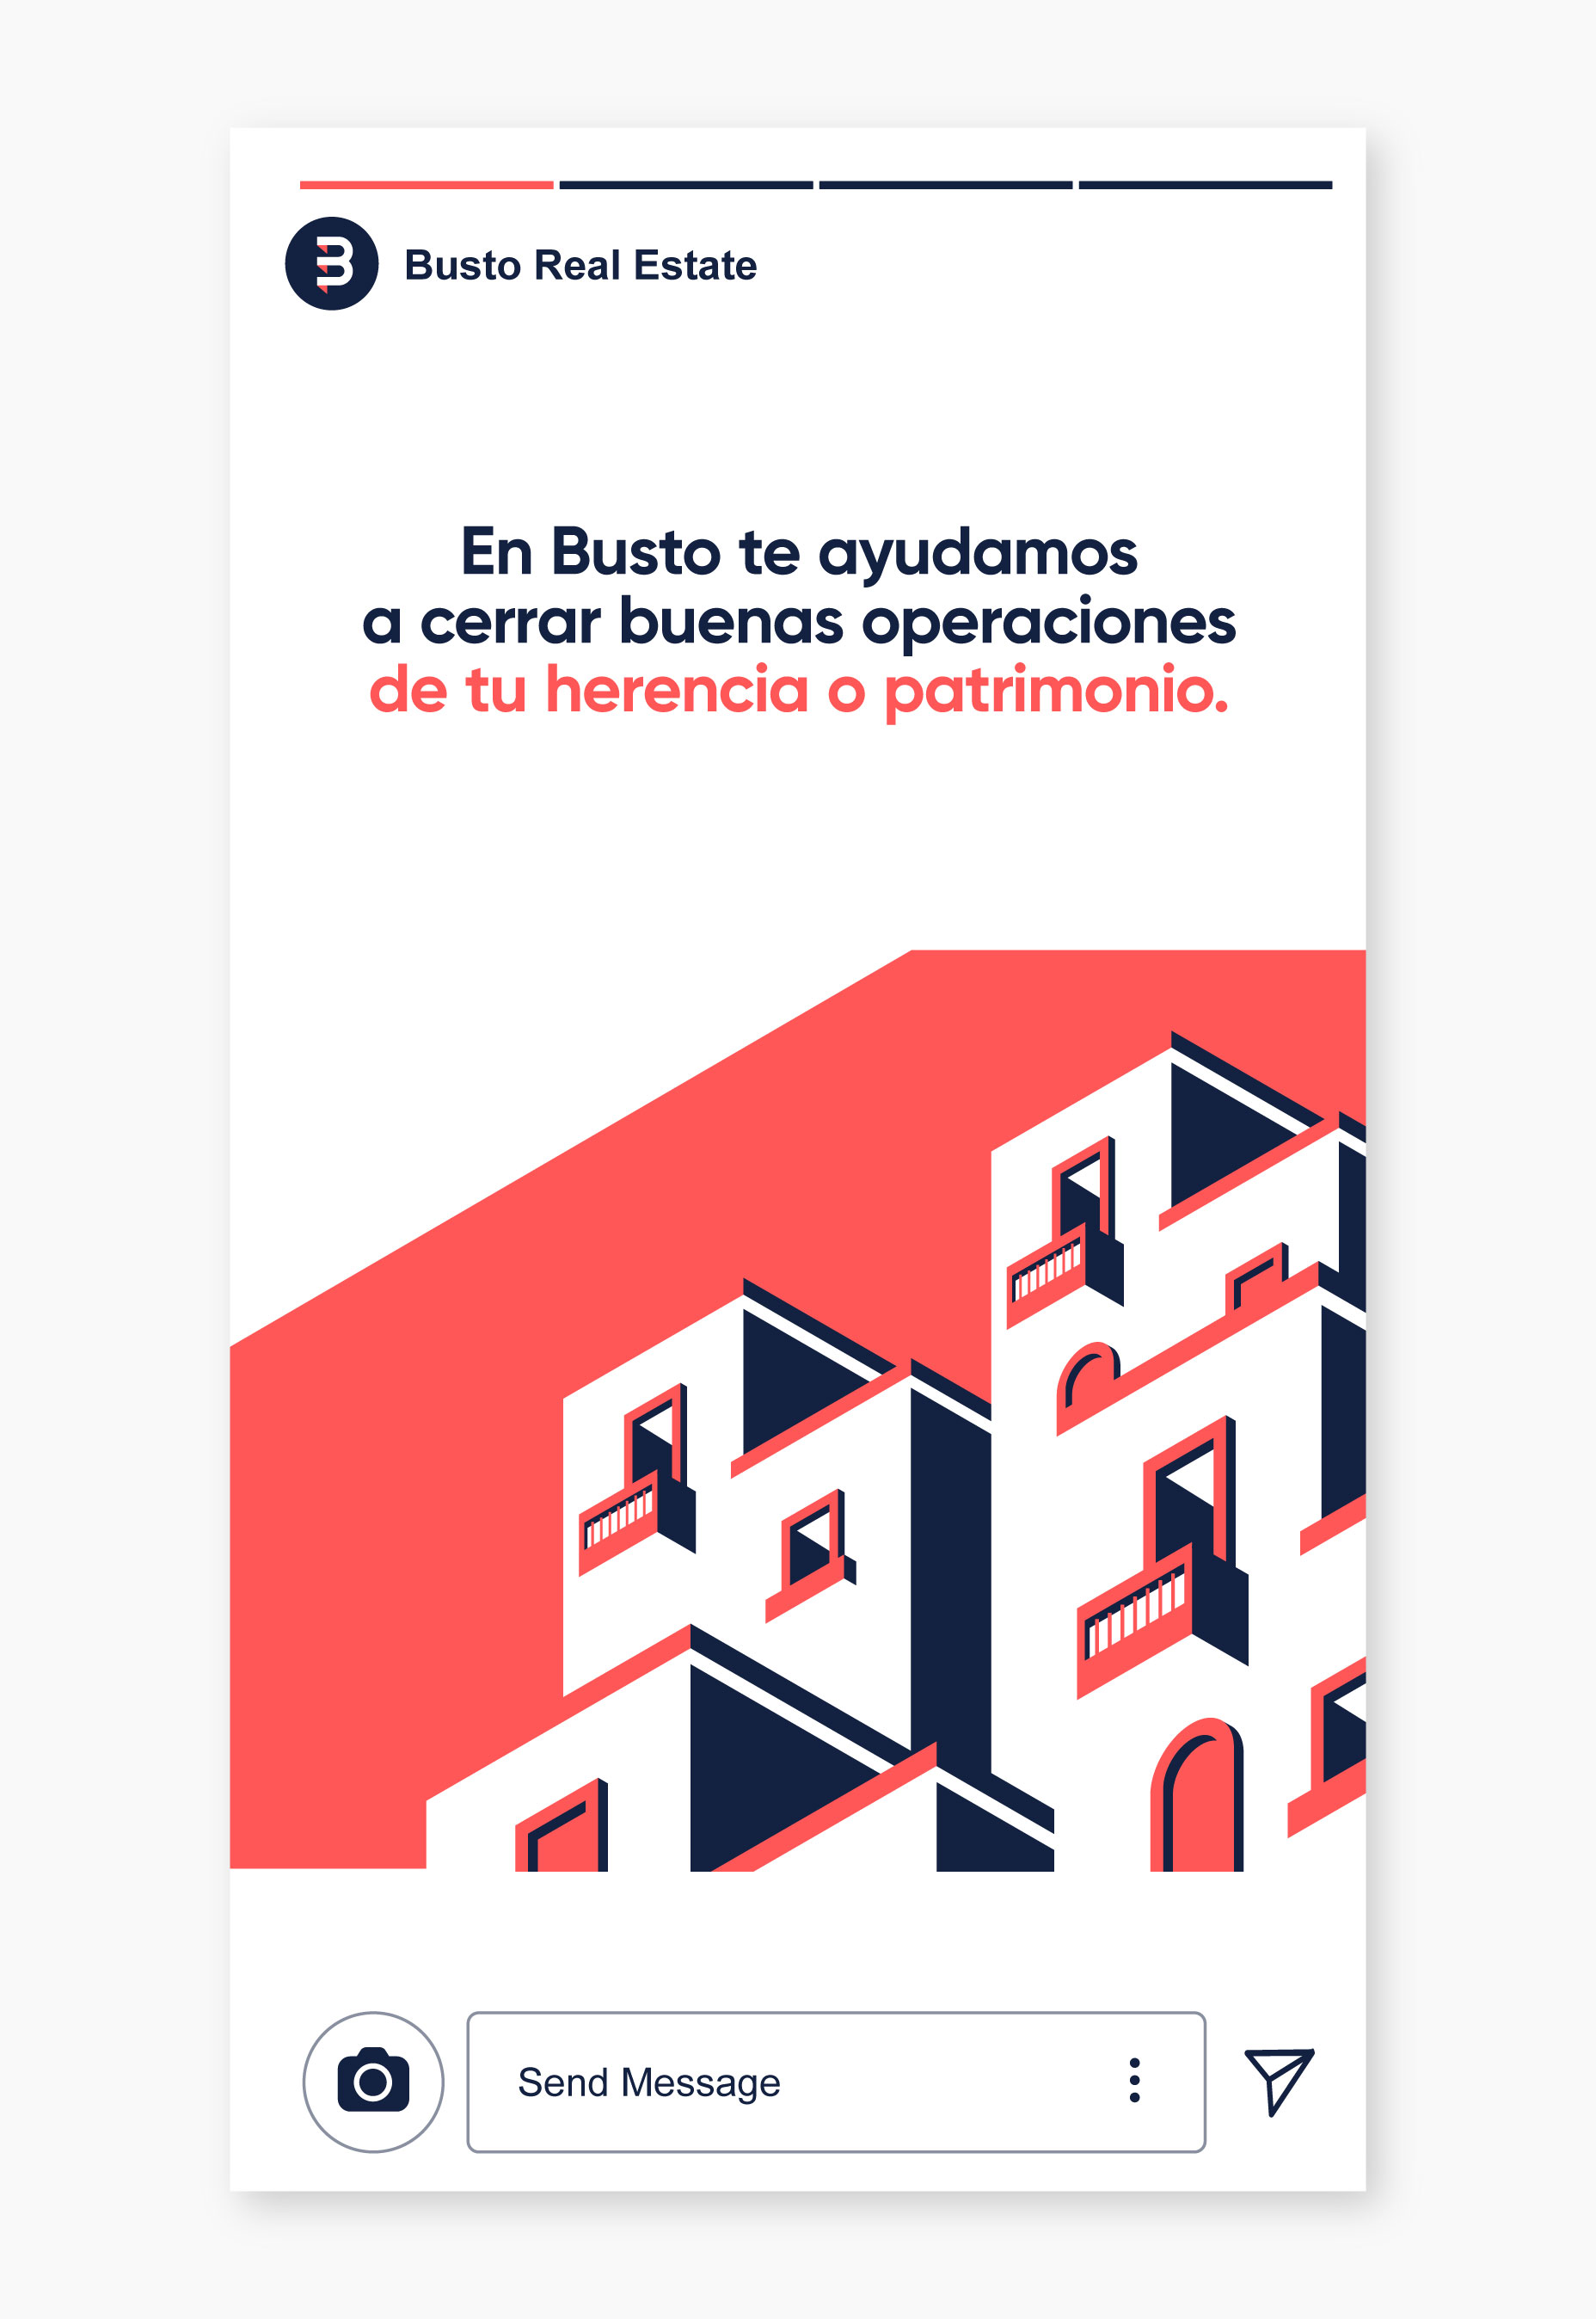 Busto Real Estate